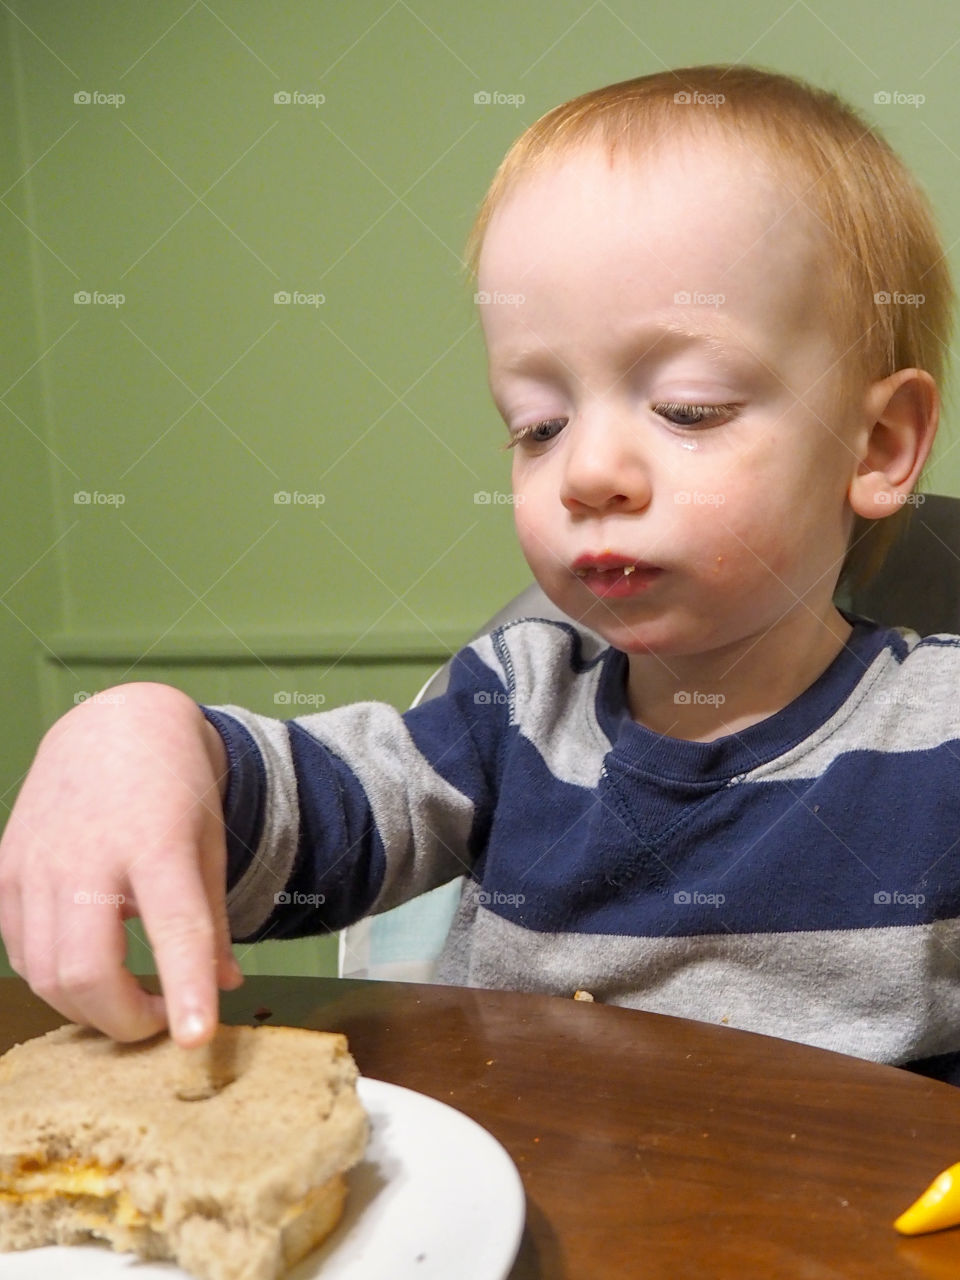 Toddler boy playing with his peanut butter and banana sandwich